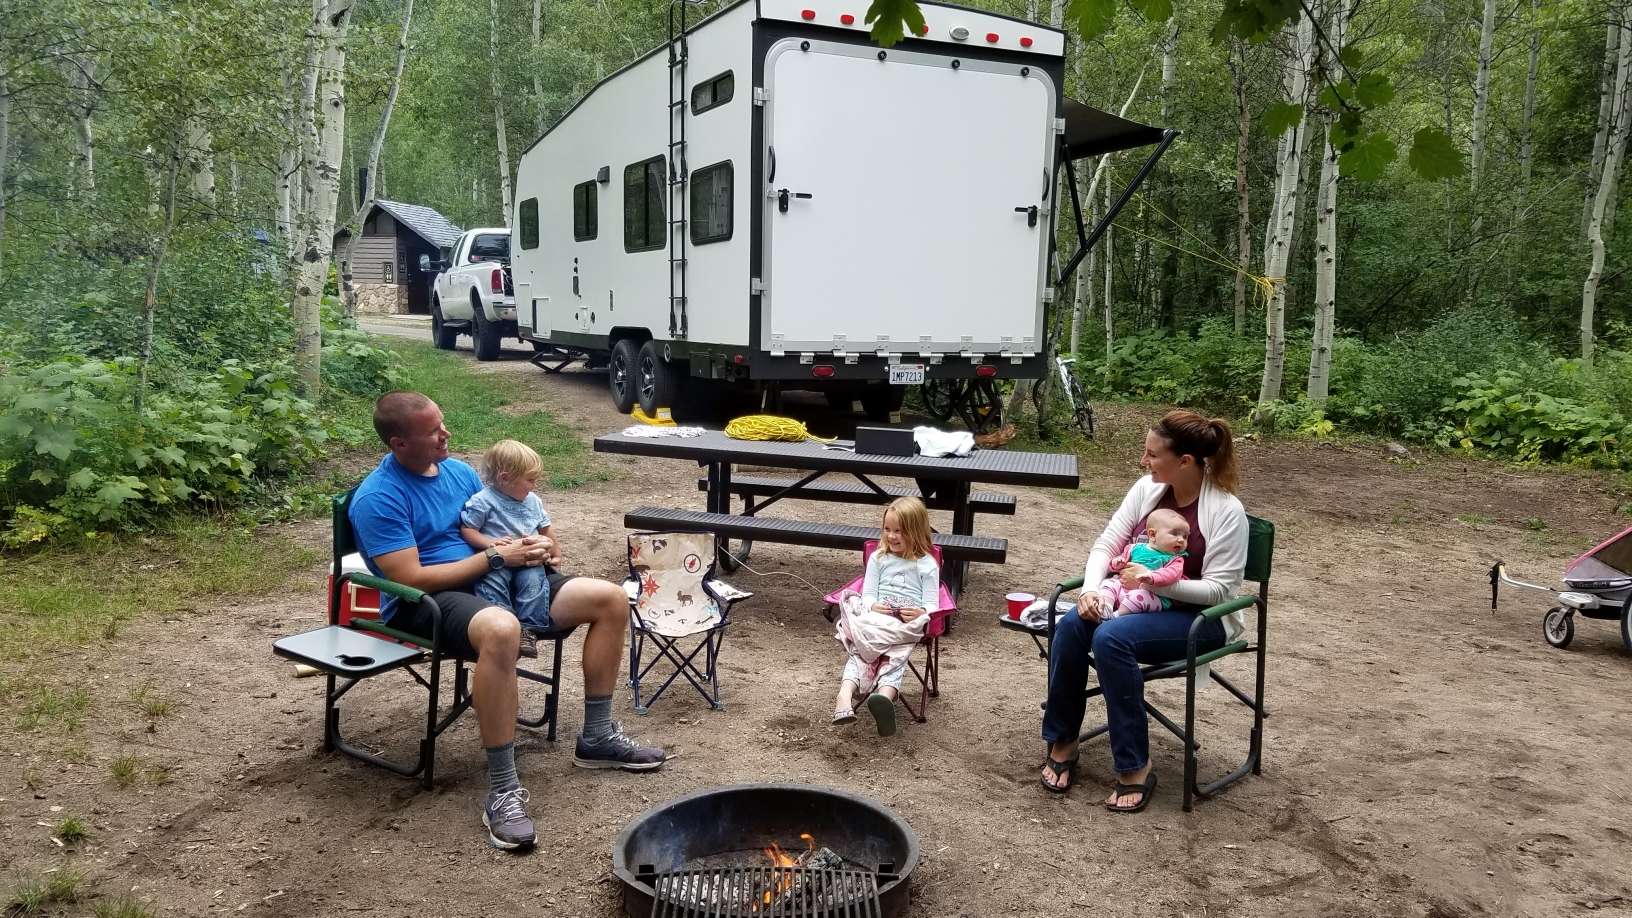 Making Families Into Happy Campers